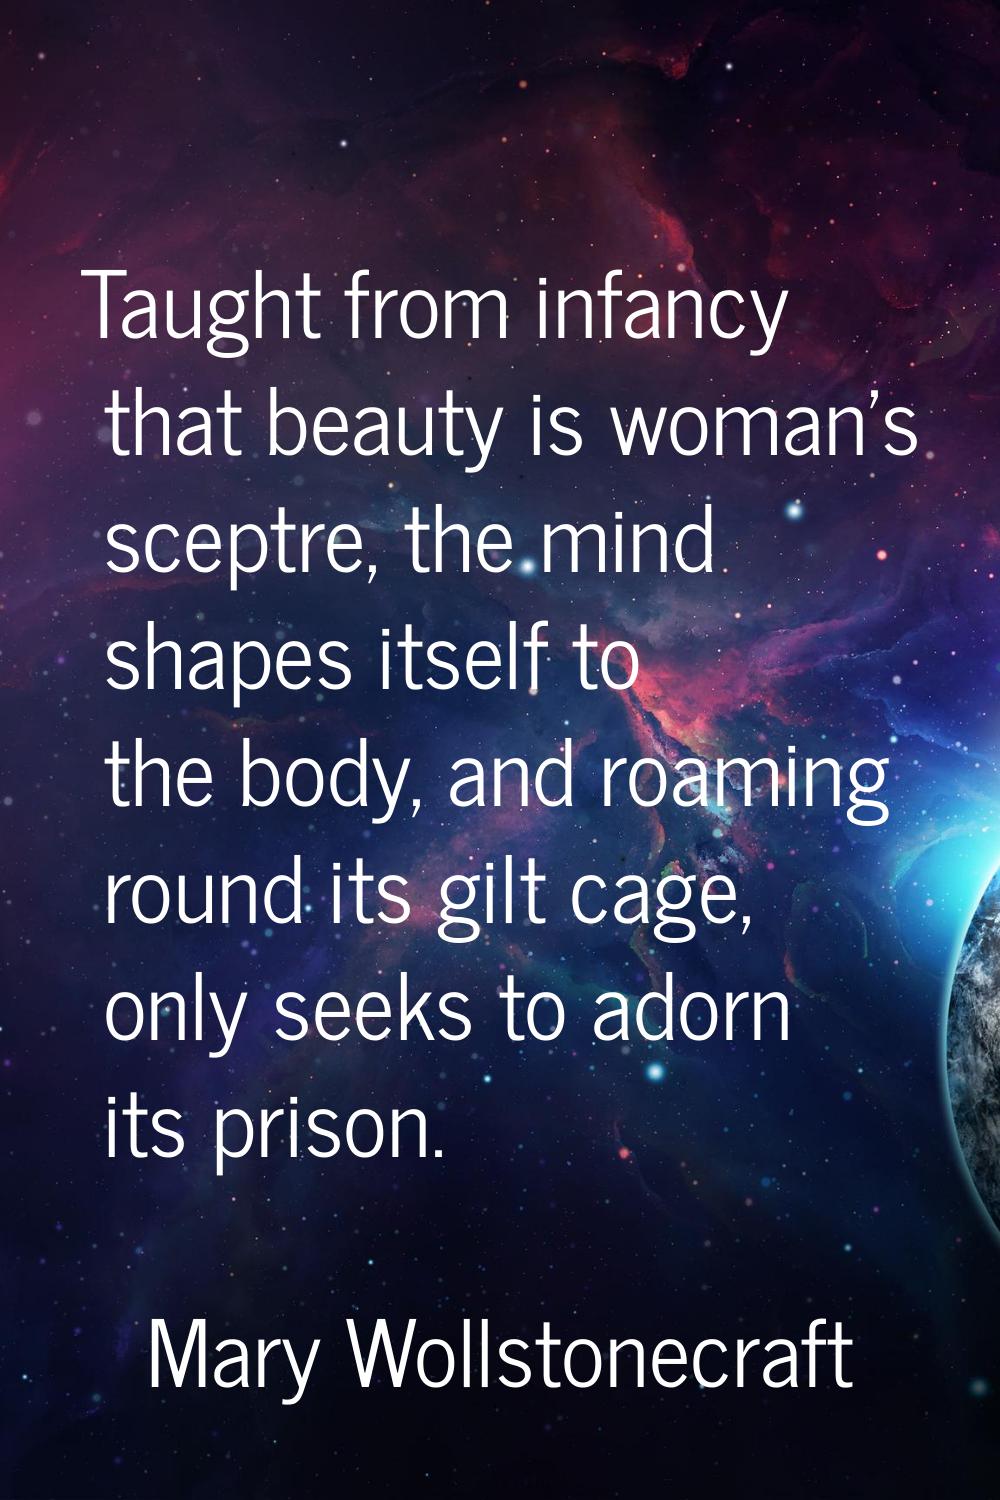 Taught from infancy that beauty is woman's sceptre, the mind shapes itself to the body, and roaming